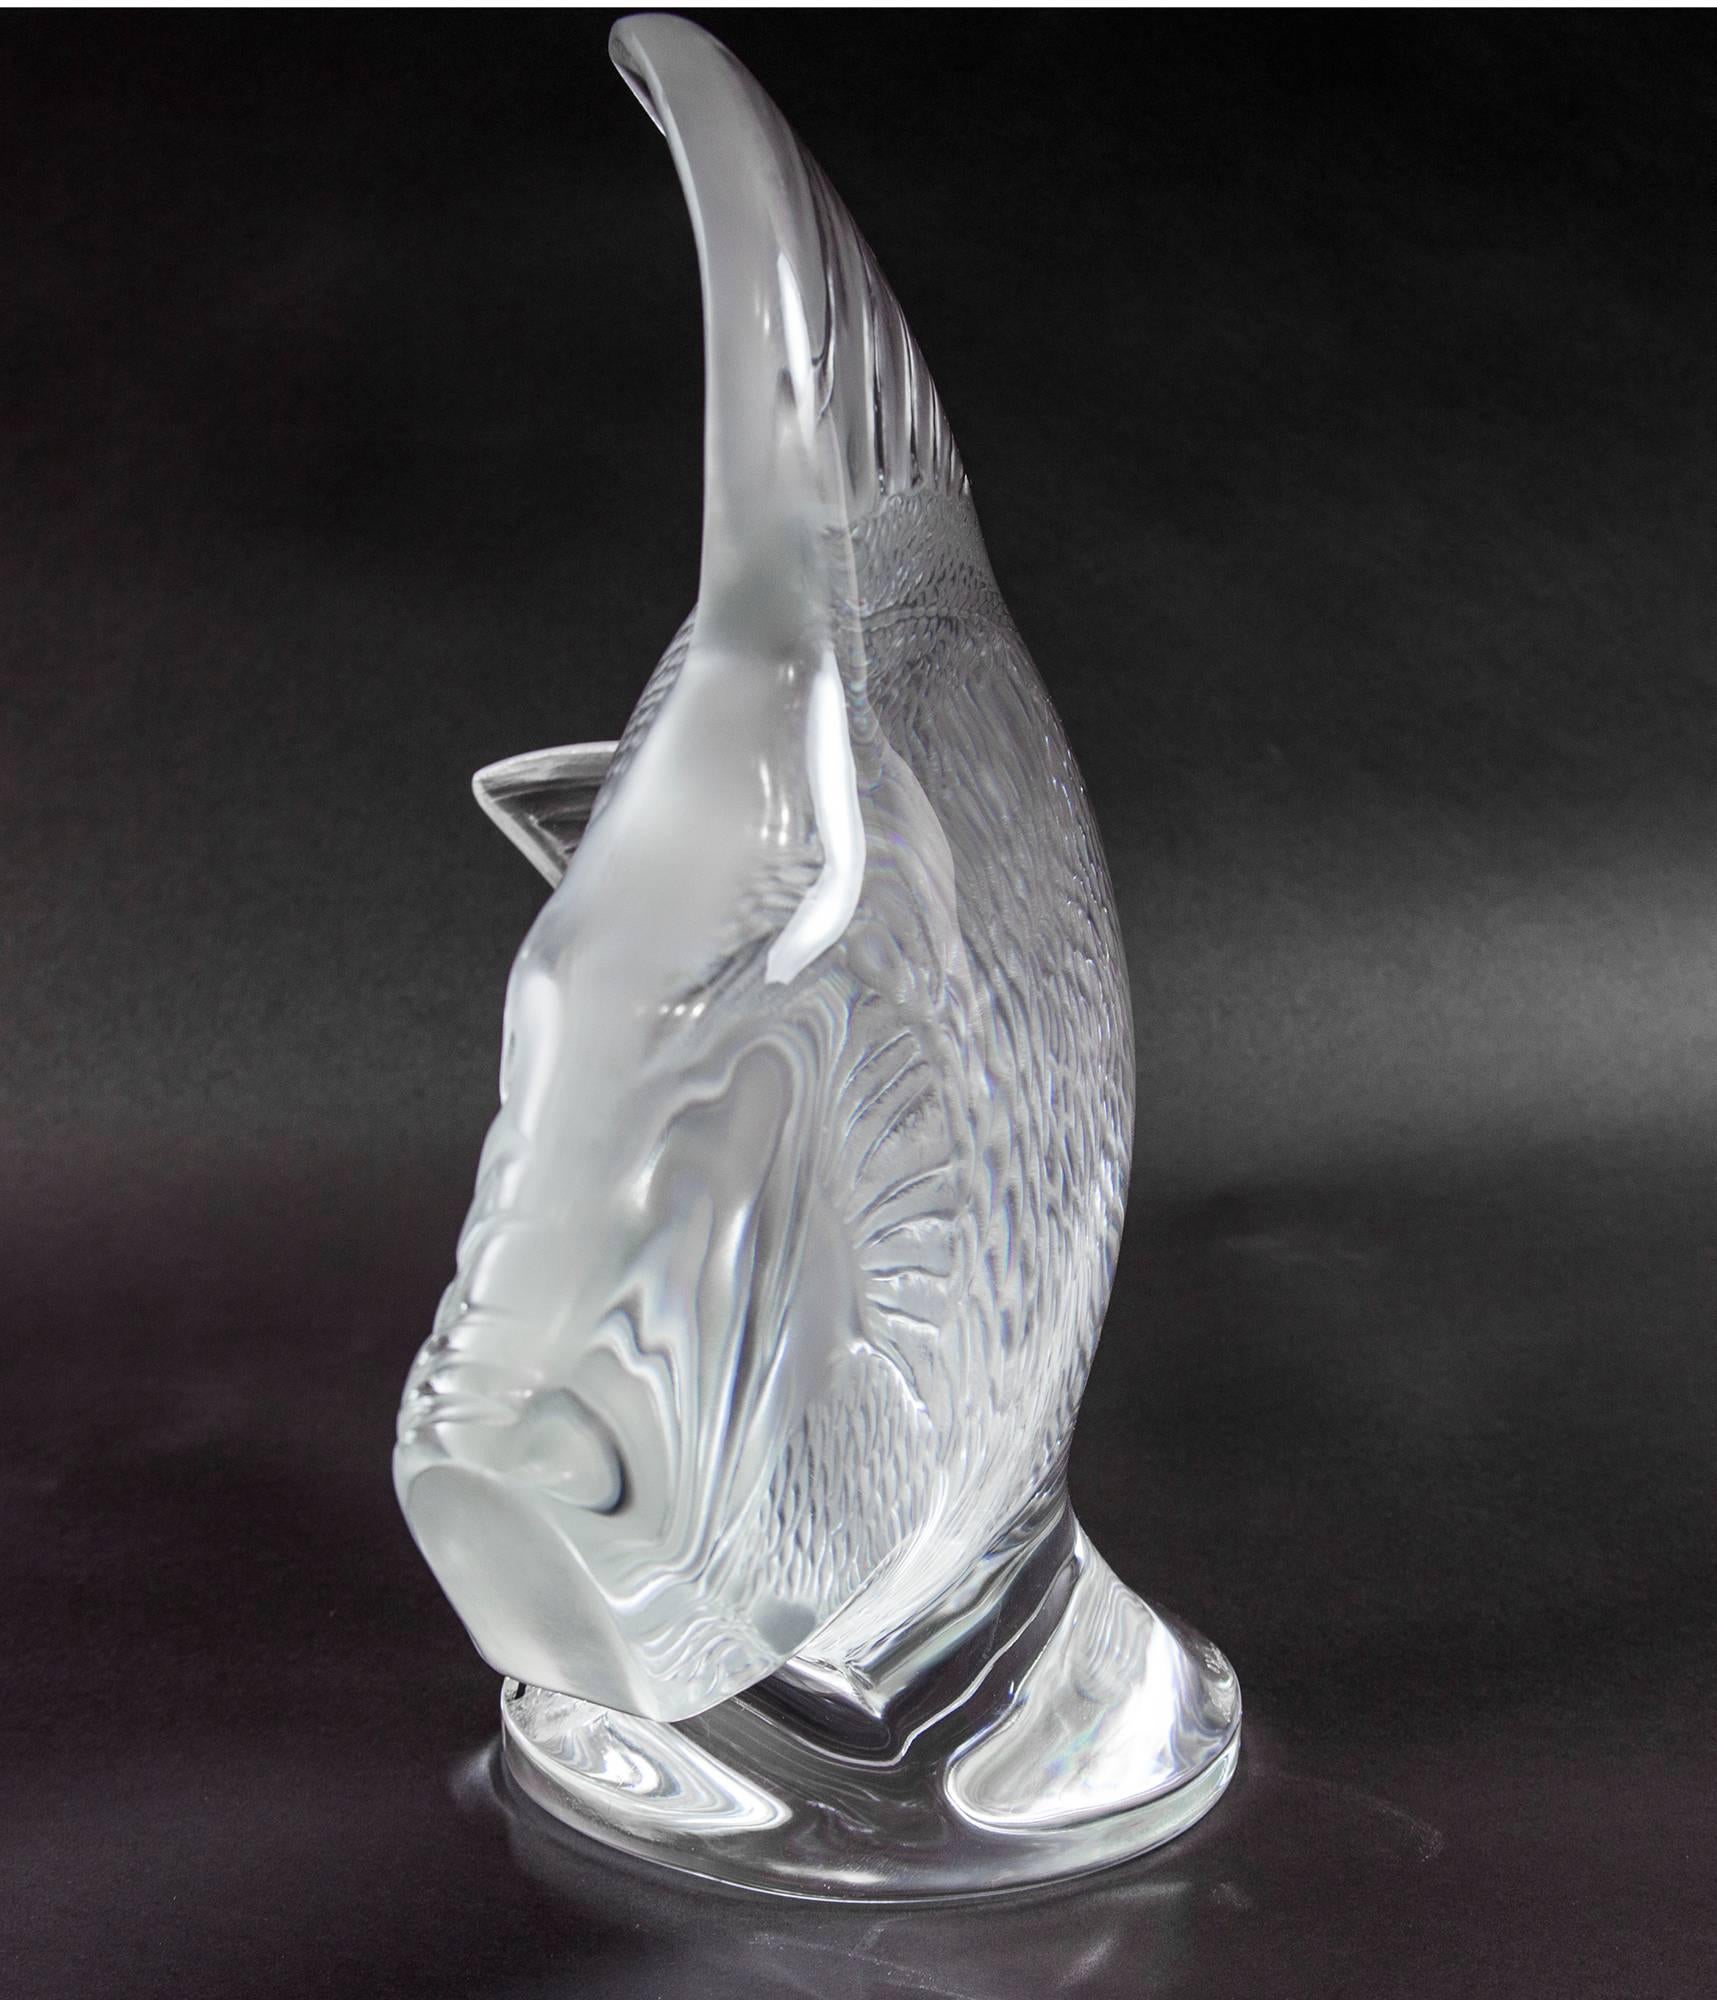 Beautiful large Lalique glass fish sculpture titled: Gros Poissons Vagues; modeled in fine detail in clear crystal; designed in 1922 by Renè Lalique, this exquisite fish is a perennial favorite. Signed on base, in script: Lalique France; applied